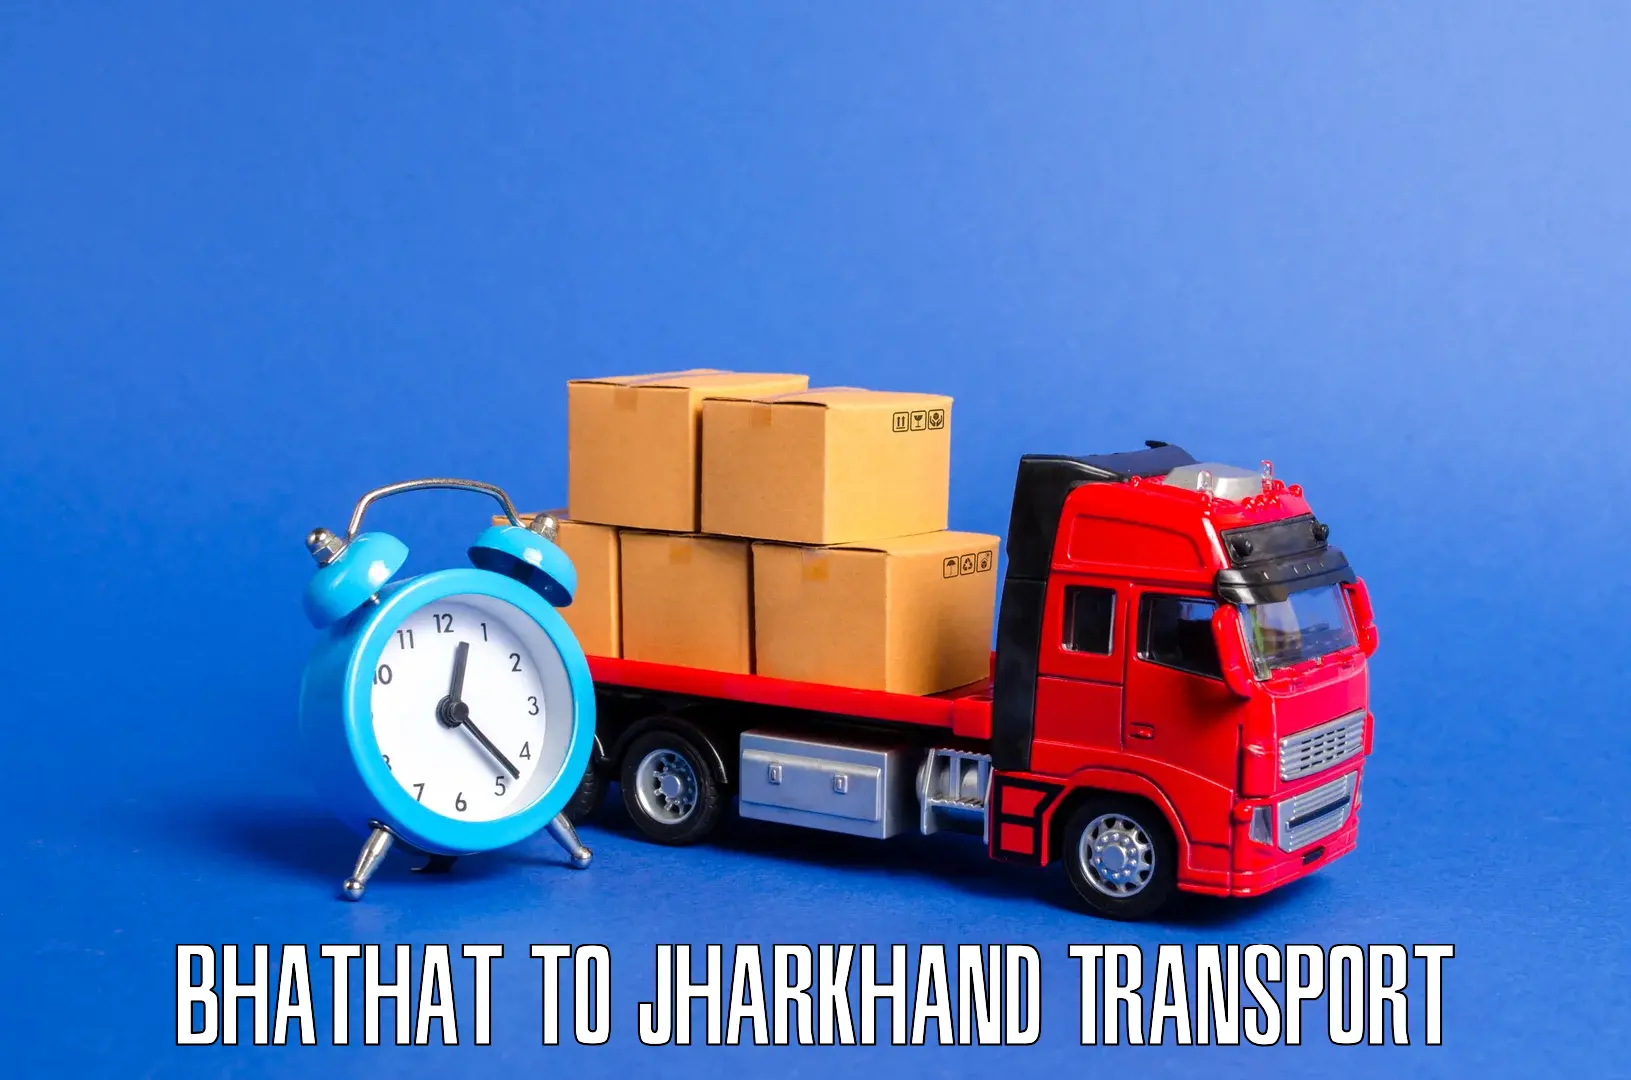 Nearby transport service Bhathat to Poreyahat